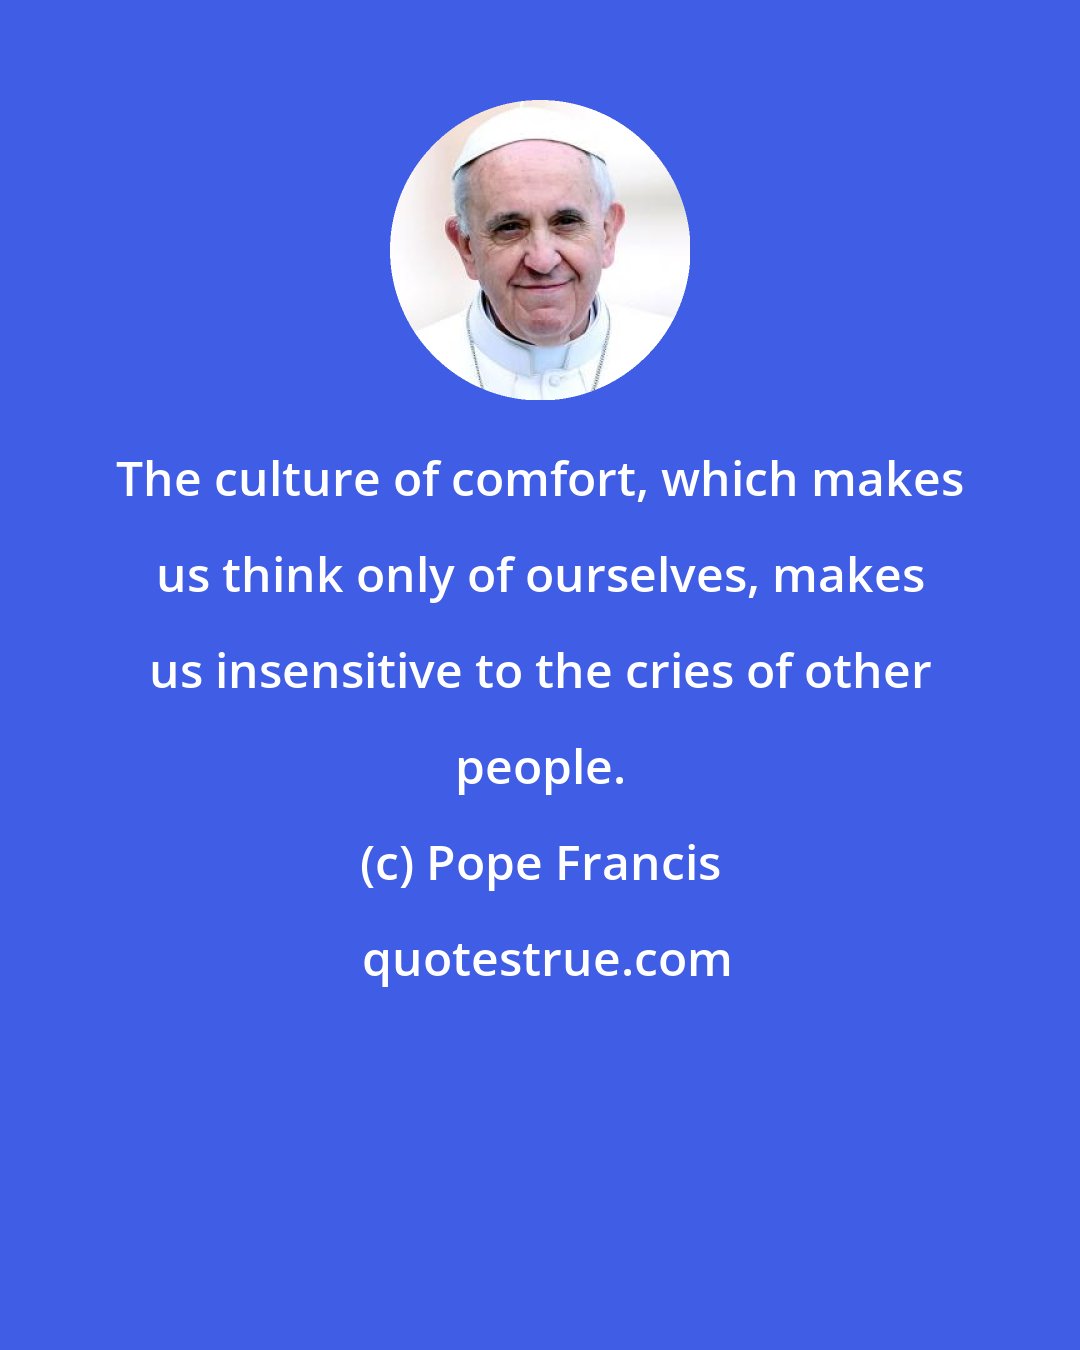 Pope Francis: The culture of comfort, which makes us think only of ourselves, makes us insensitive to the cries of other people.